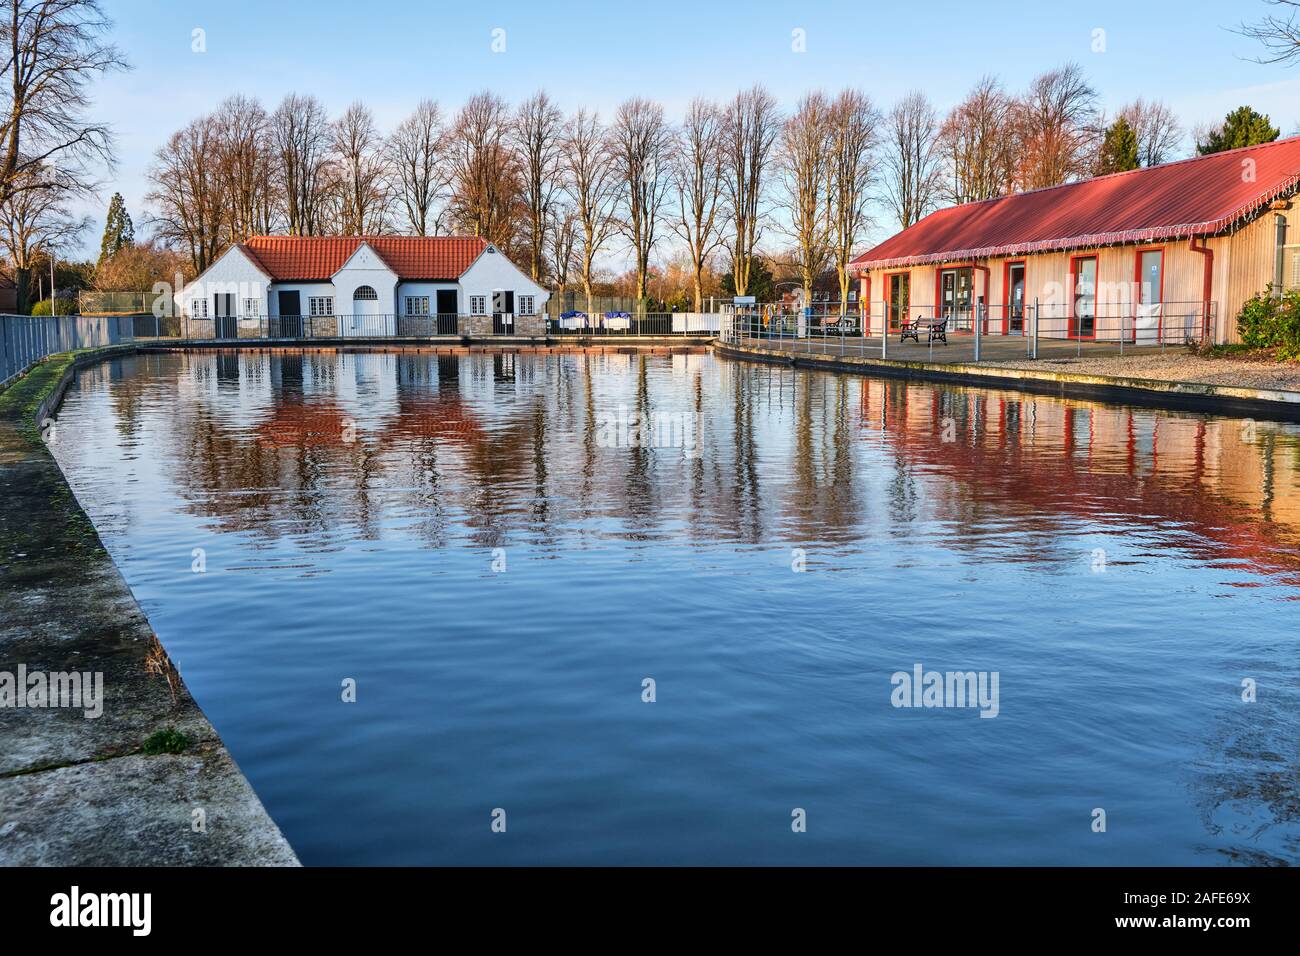 The model boating lake, club house and visitors centre in Wyndham Park, Grantham, Lincolnshire Stock Photo